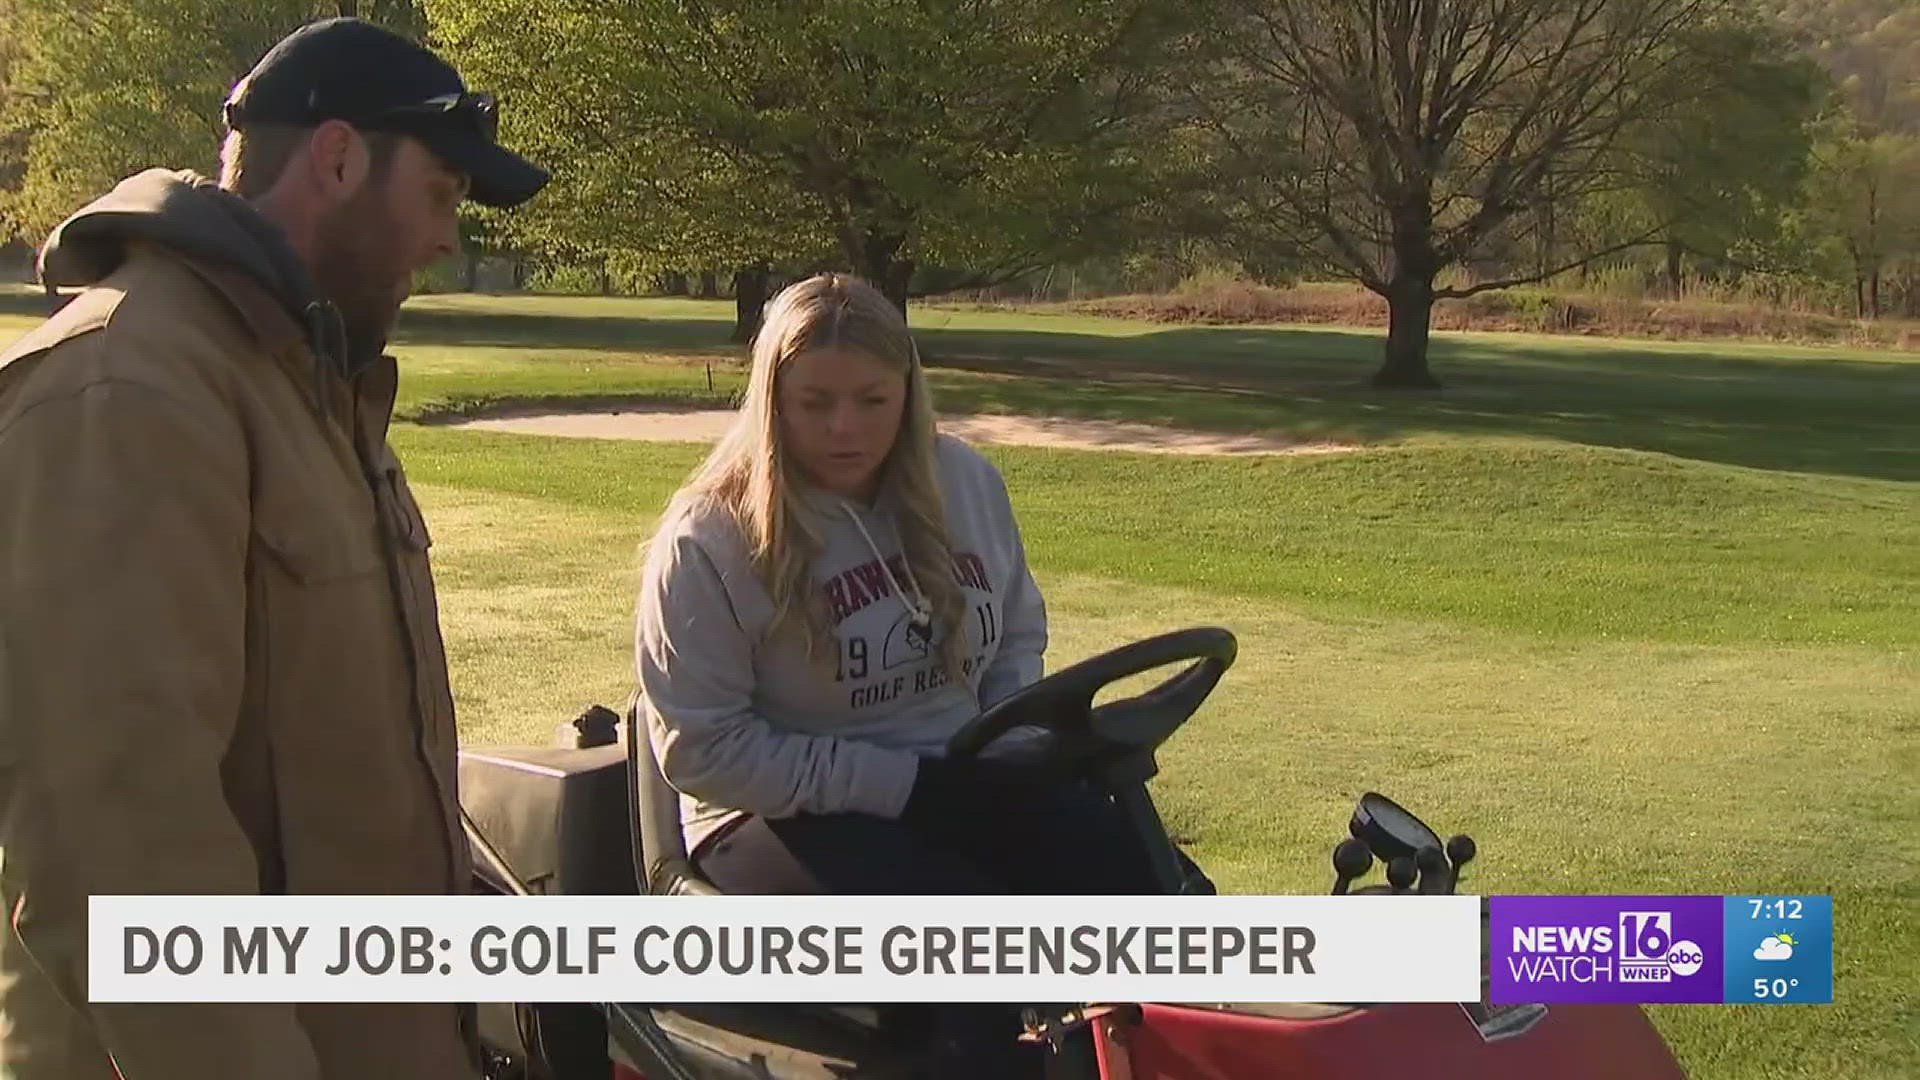 In this week's Do My Job: The Resort Edition, Newswatch 16's Amanda Eustice stopped by a golf resort in Monroe County to show us what the job entails.